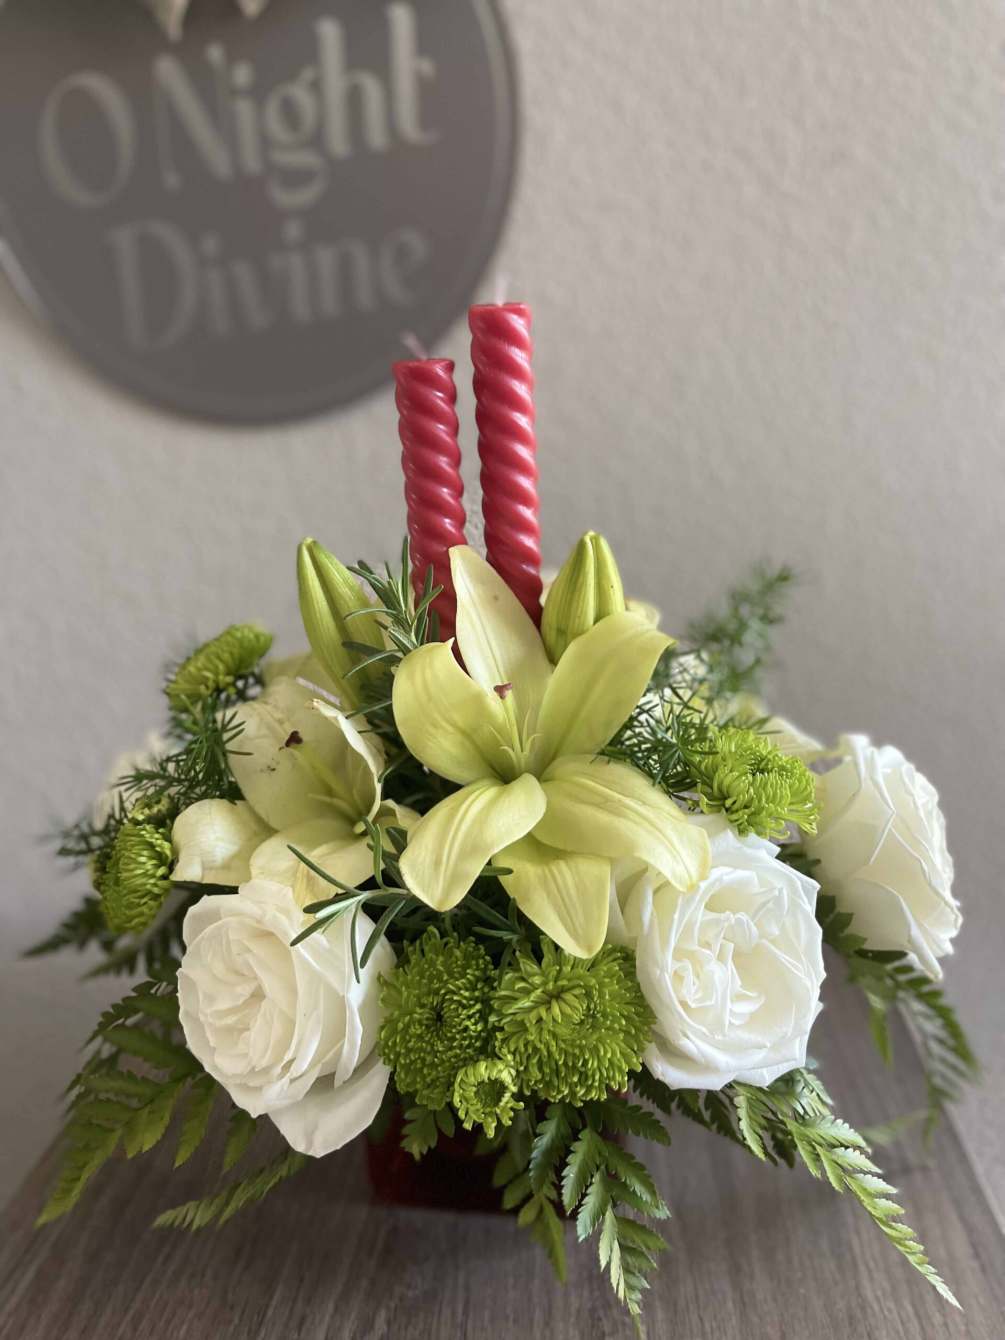 This arrangement is a breathtaking festive centerpiece. The bouquet is composed of